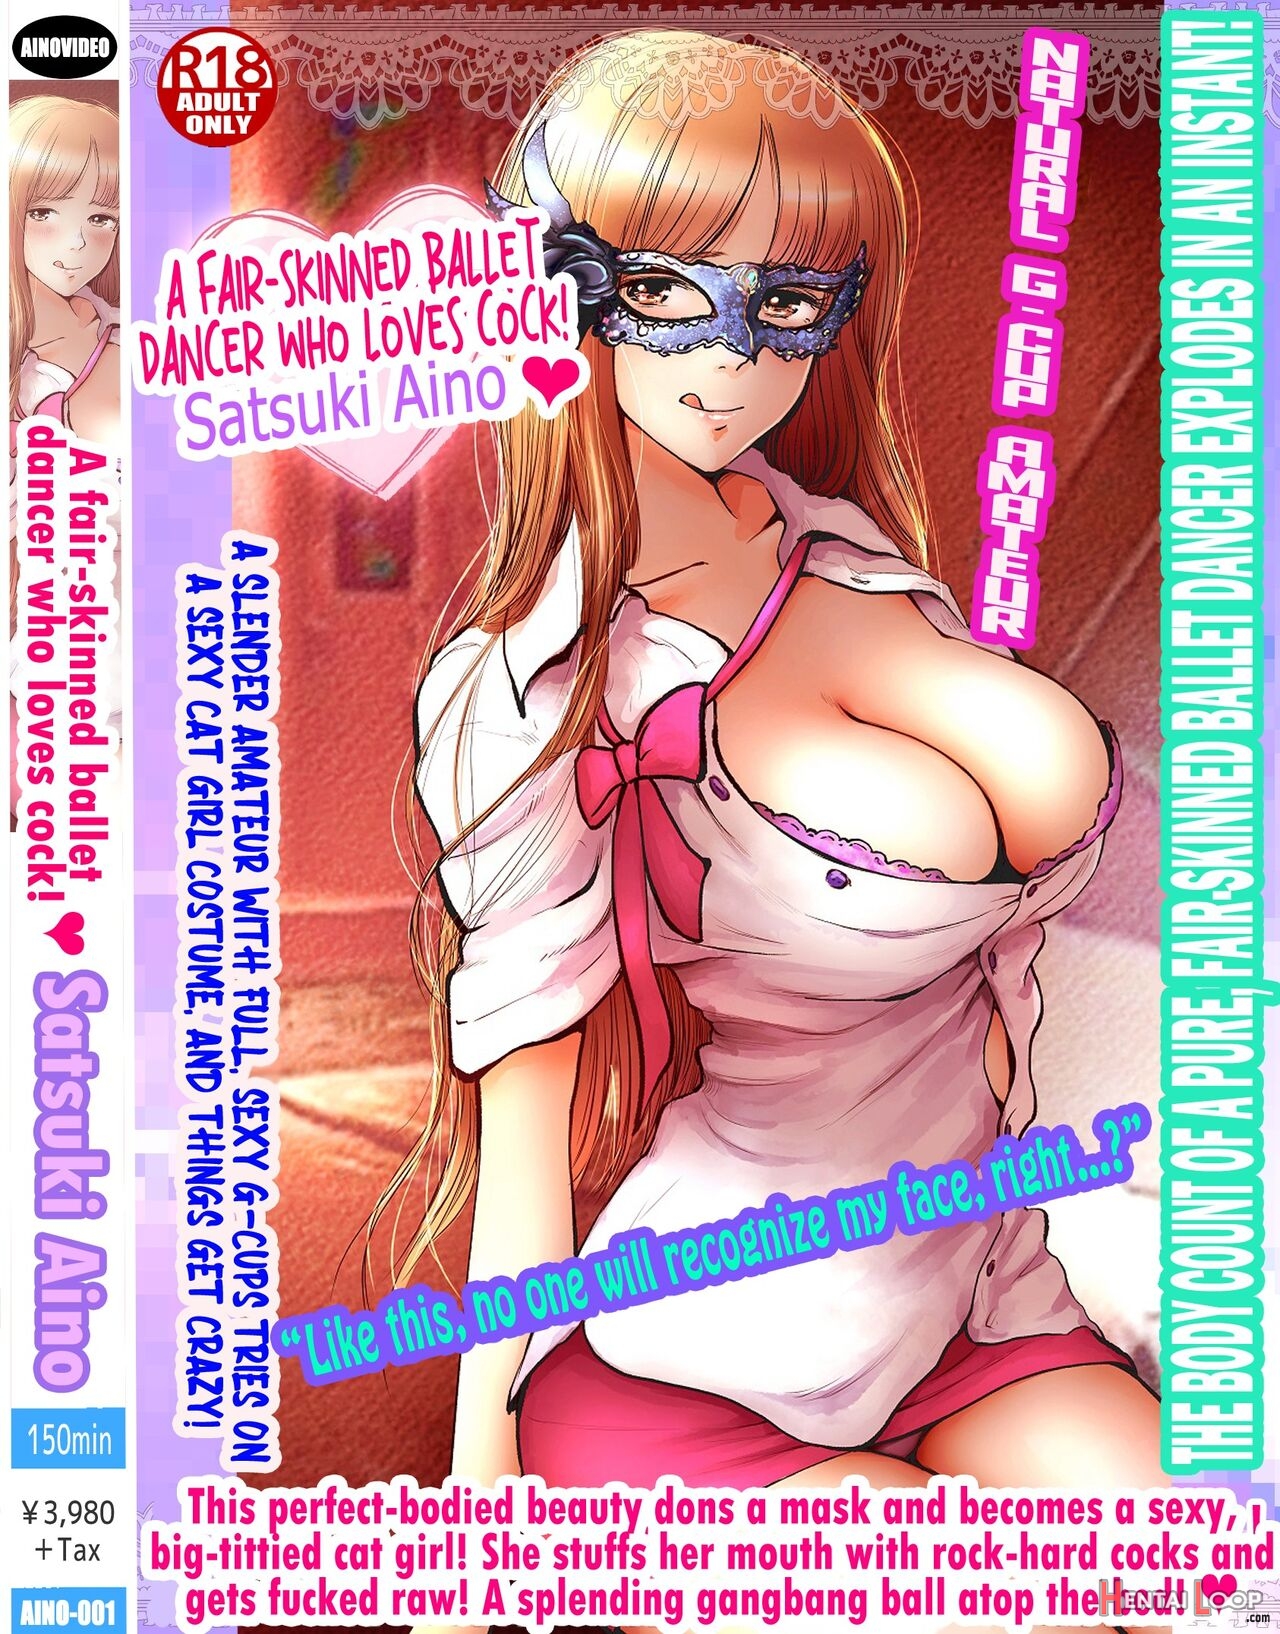 Story Of Amateur - Porn-filming Story (by Aino) - Hentai doujinshi for free at HentaiLoop